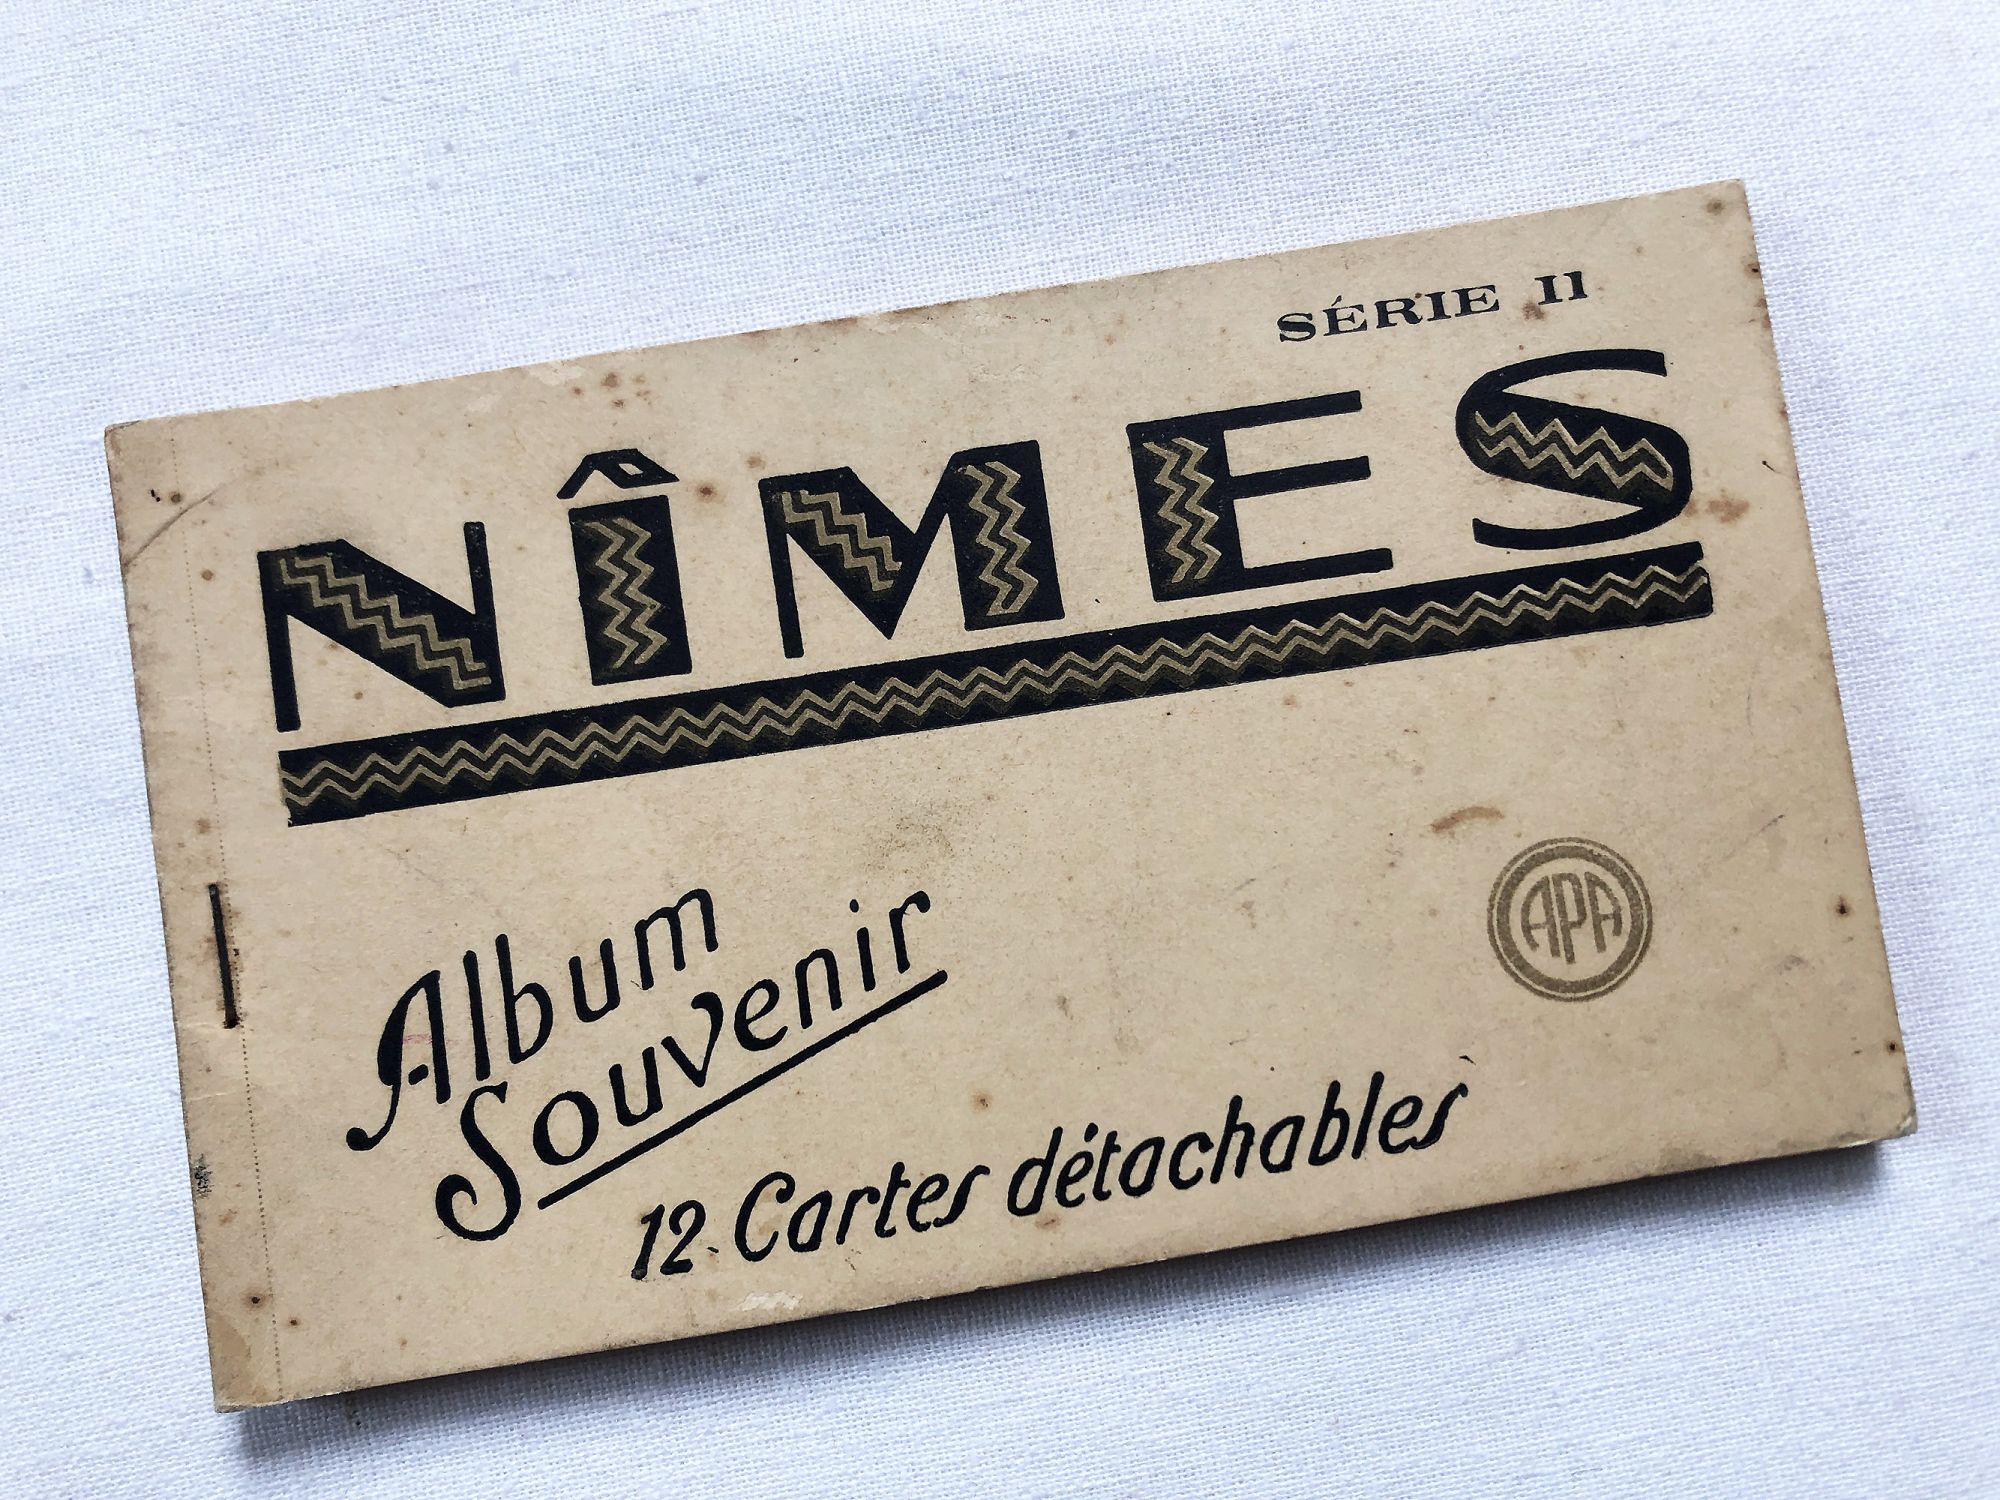 Booklet of 12 vintage postcards of the city of Nimes by French editor André Poux in the 1950s